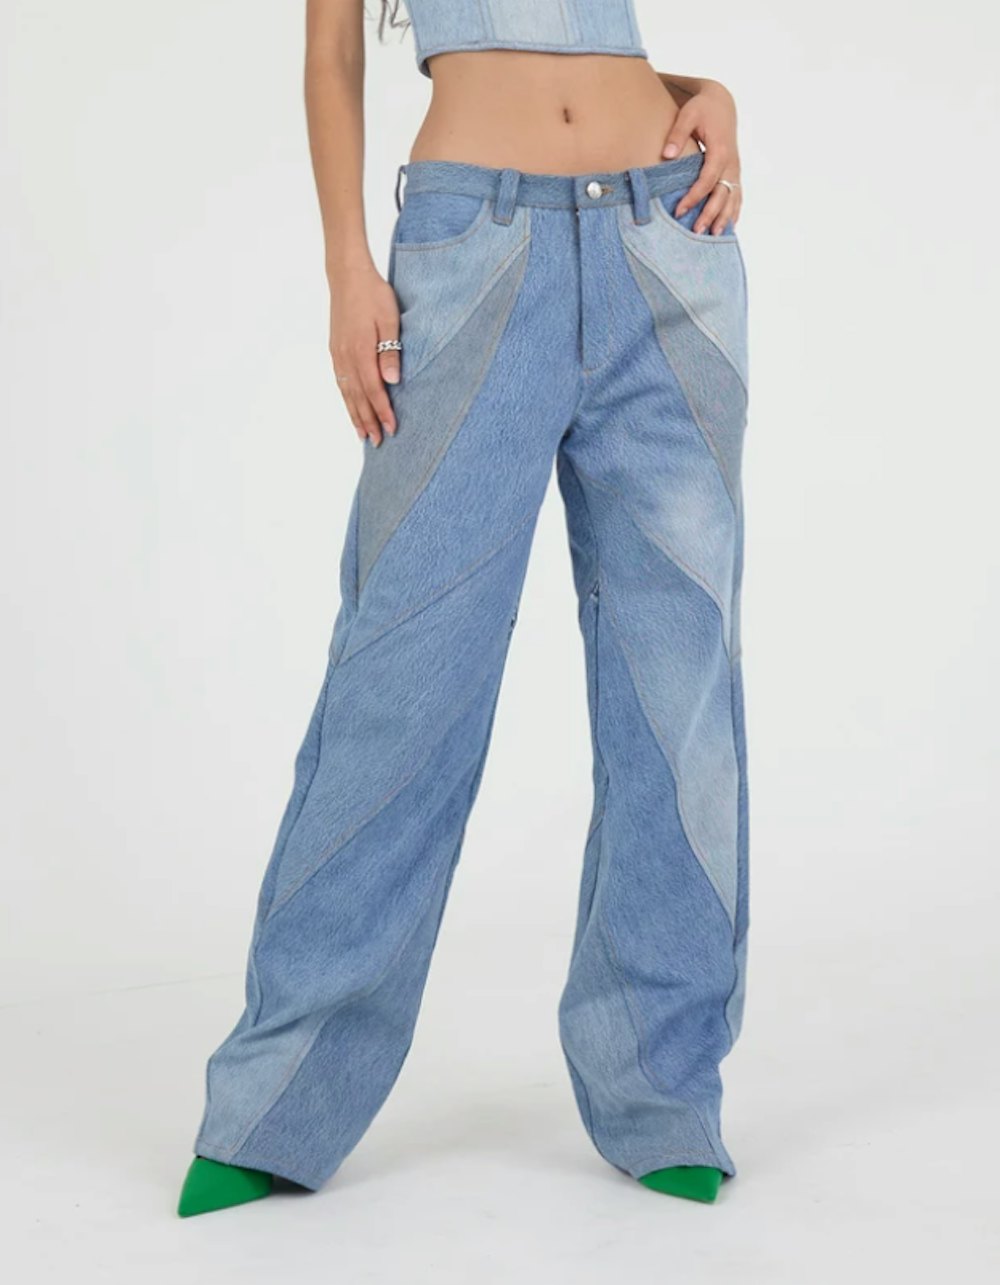 Vien Boyfriend Jeans Vien Boyfriend Jeans Vien Boyfriend Jeans